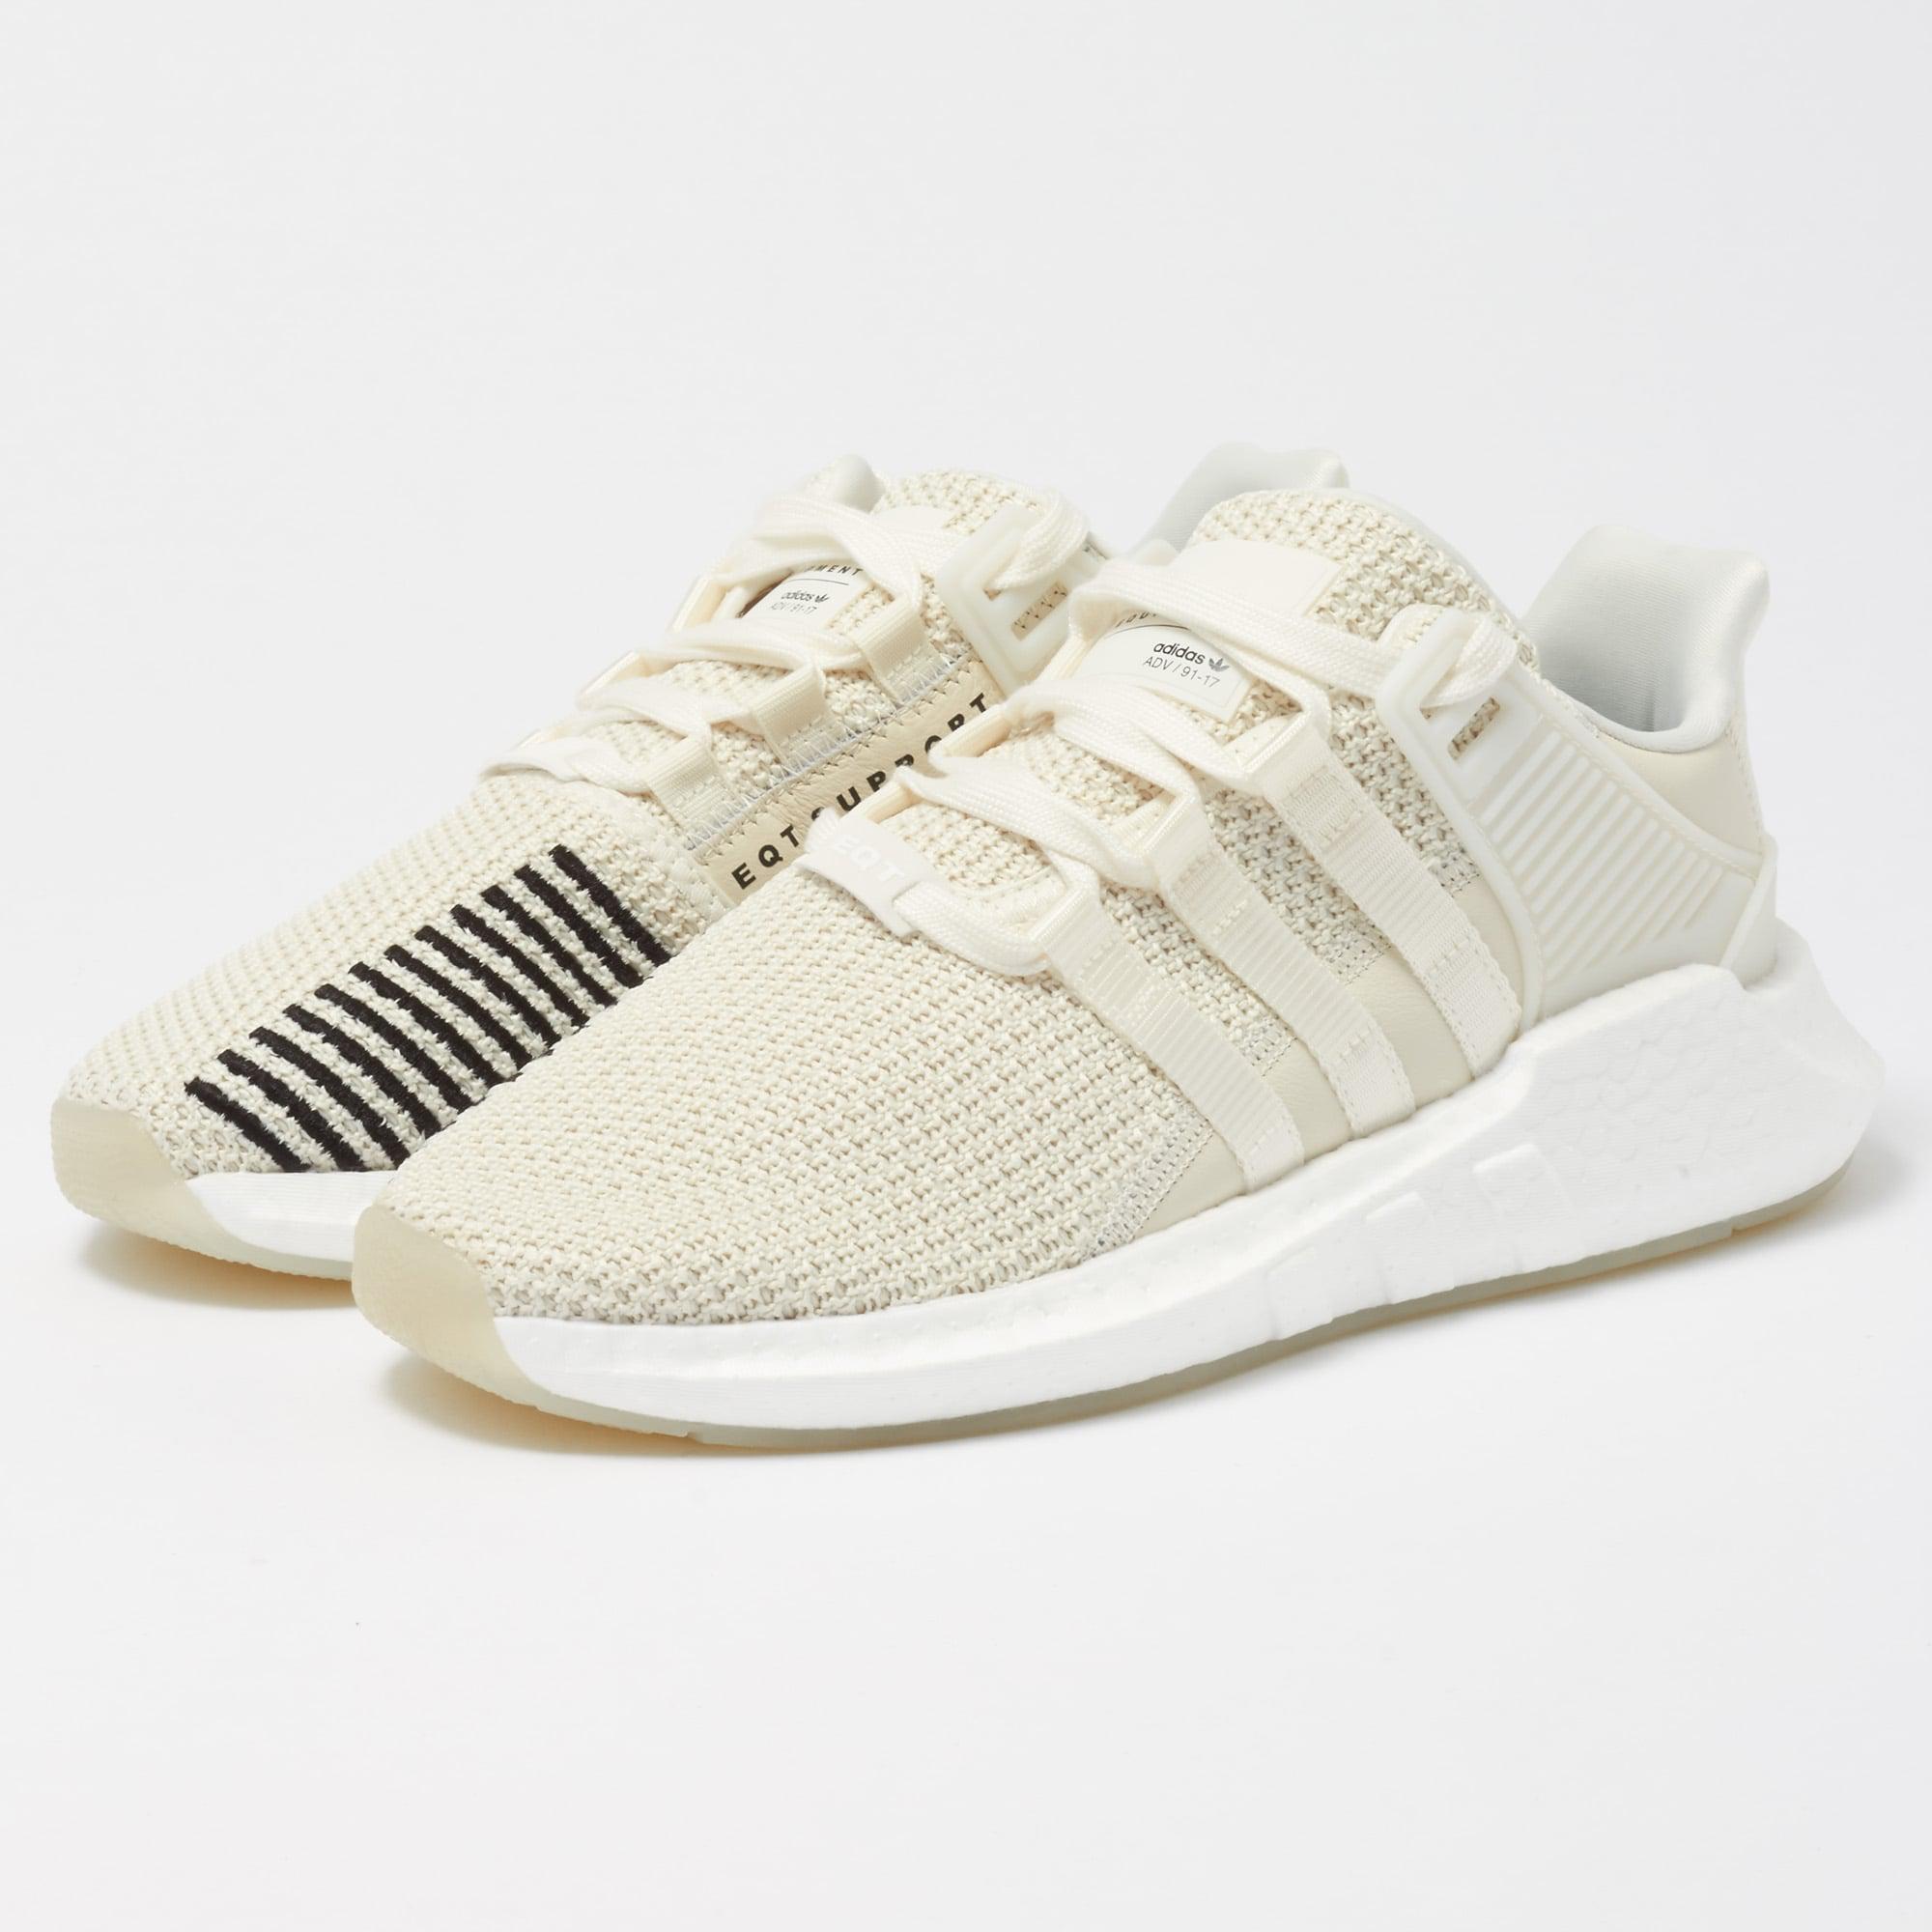 adidas eqt support racing adv sneaker